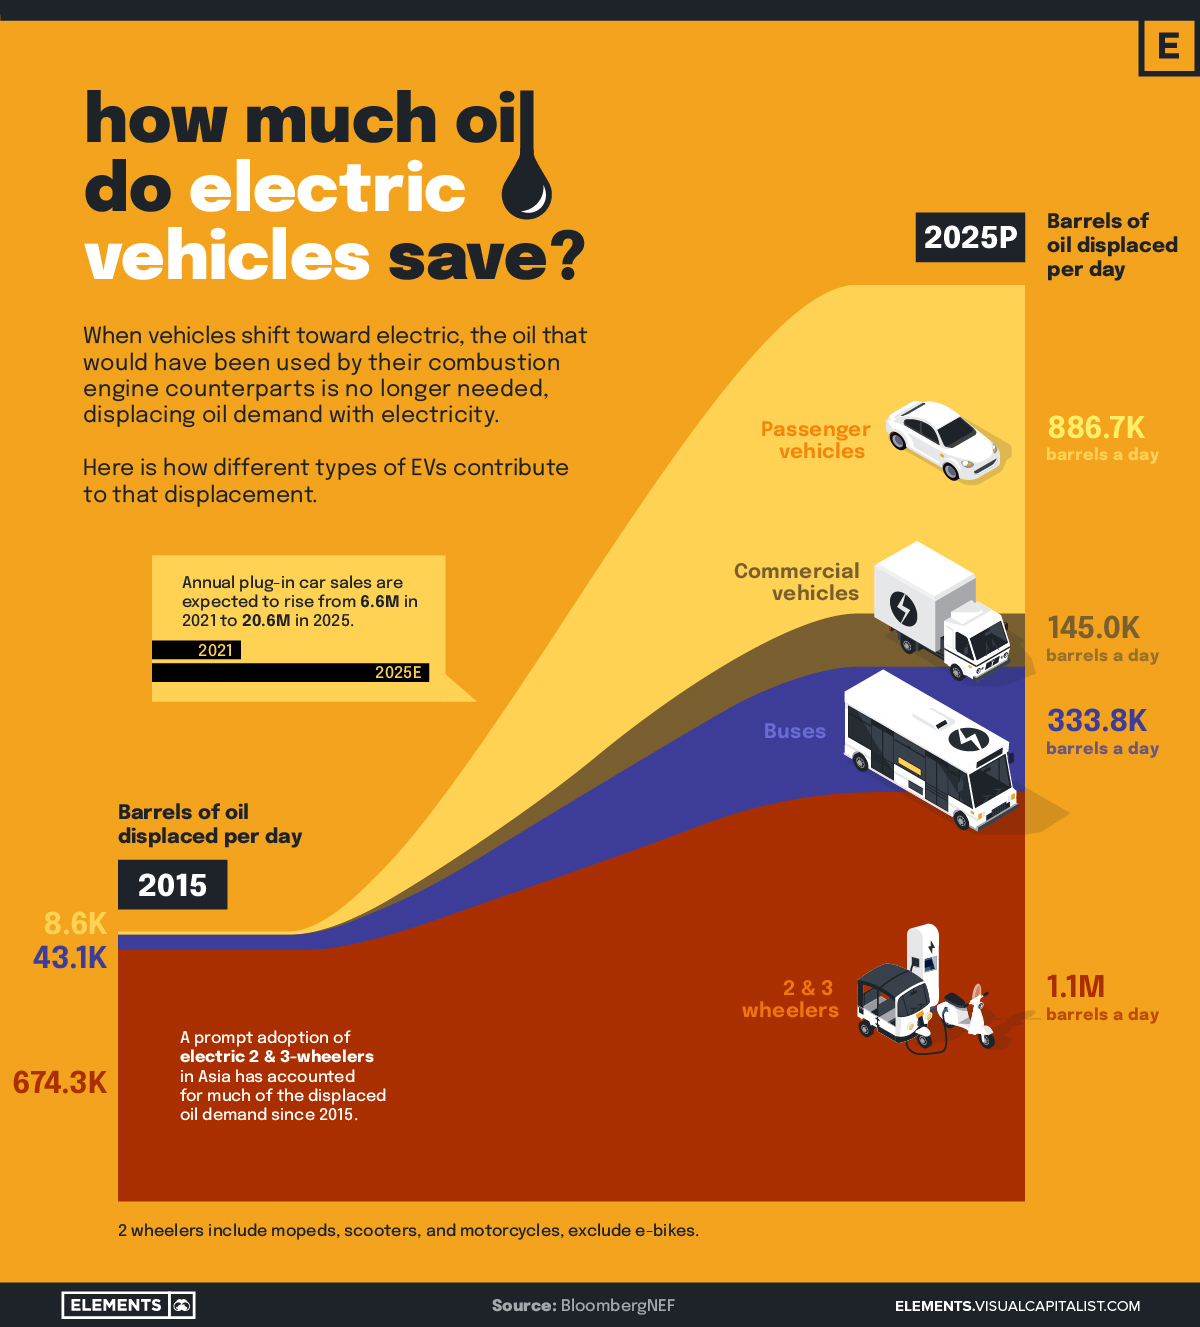 How the adoption of electric vehicles will affect oil consumption (2015